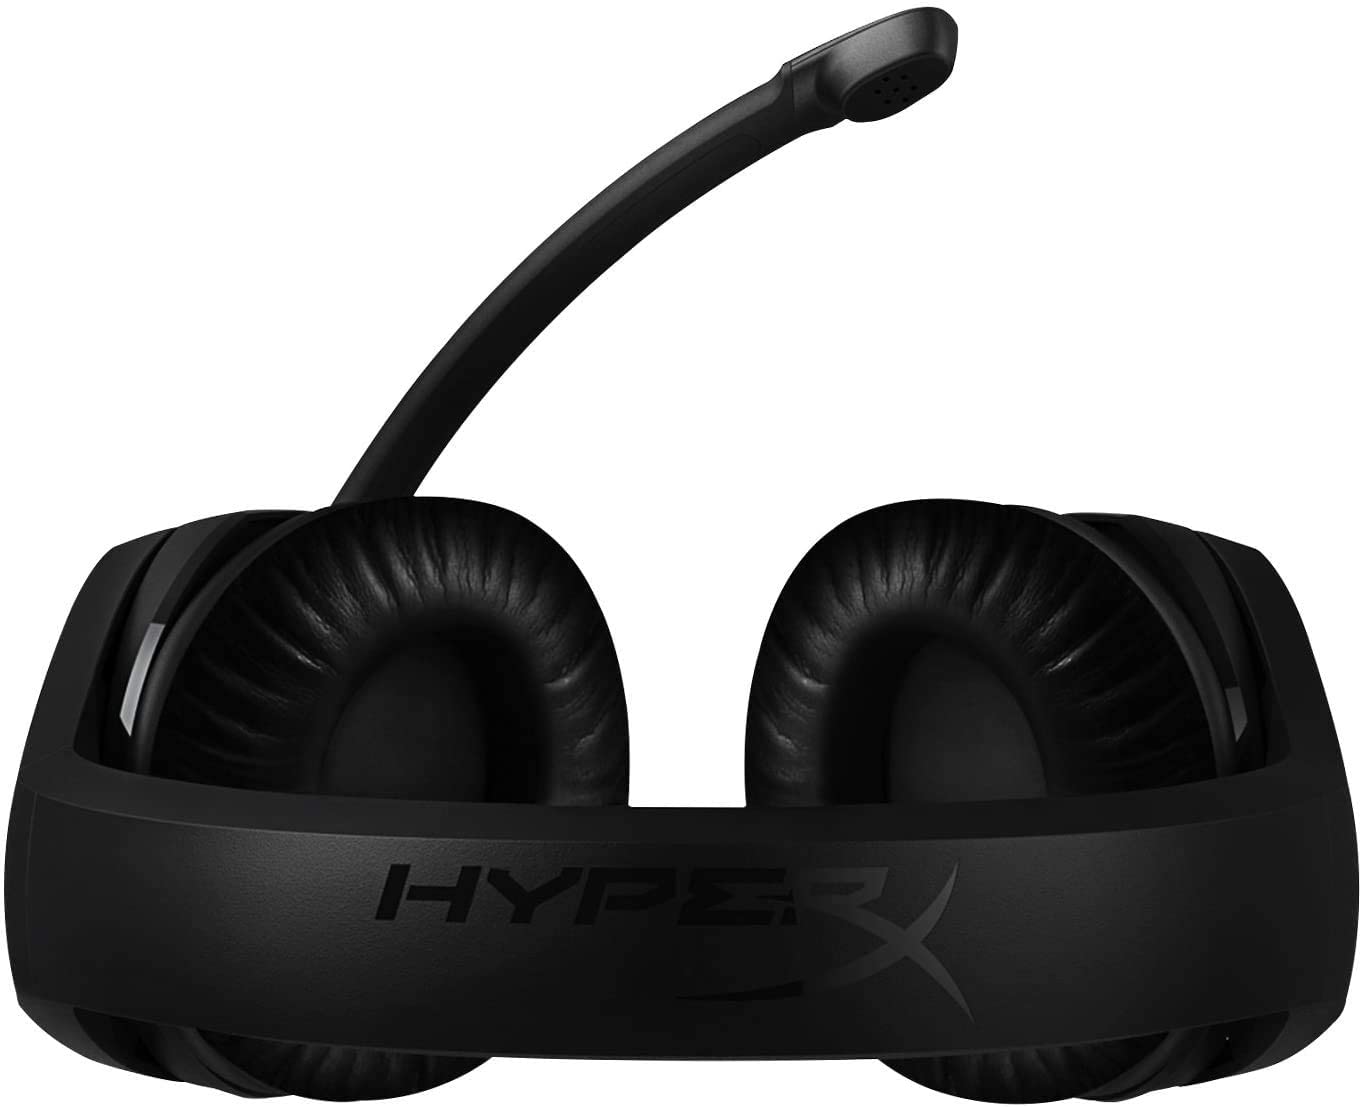 HyperX HX-HSCS-BK/AS Cloud Stinger Gaming Headset with Comfortable Foam, Swivel to Mute, Noise Cancellation for PC, Xbox One, PS4 and Mobile Devices